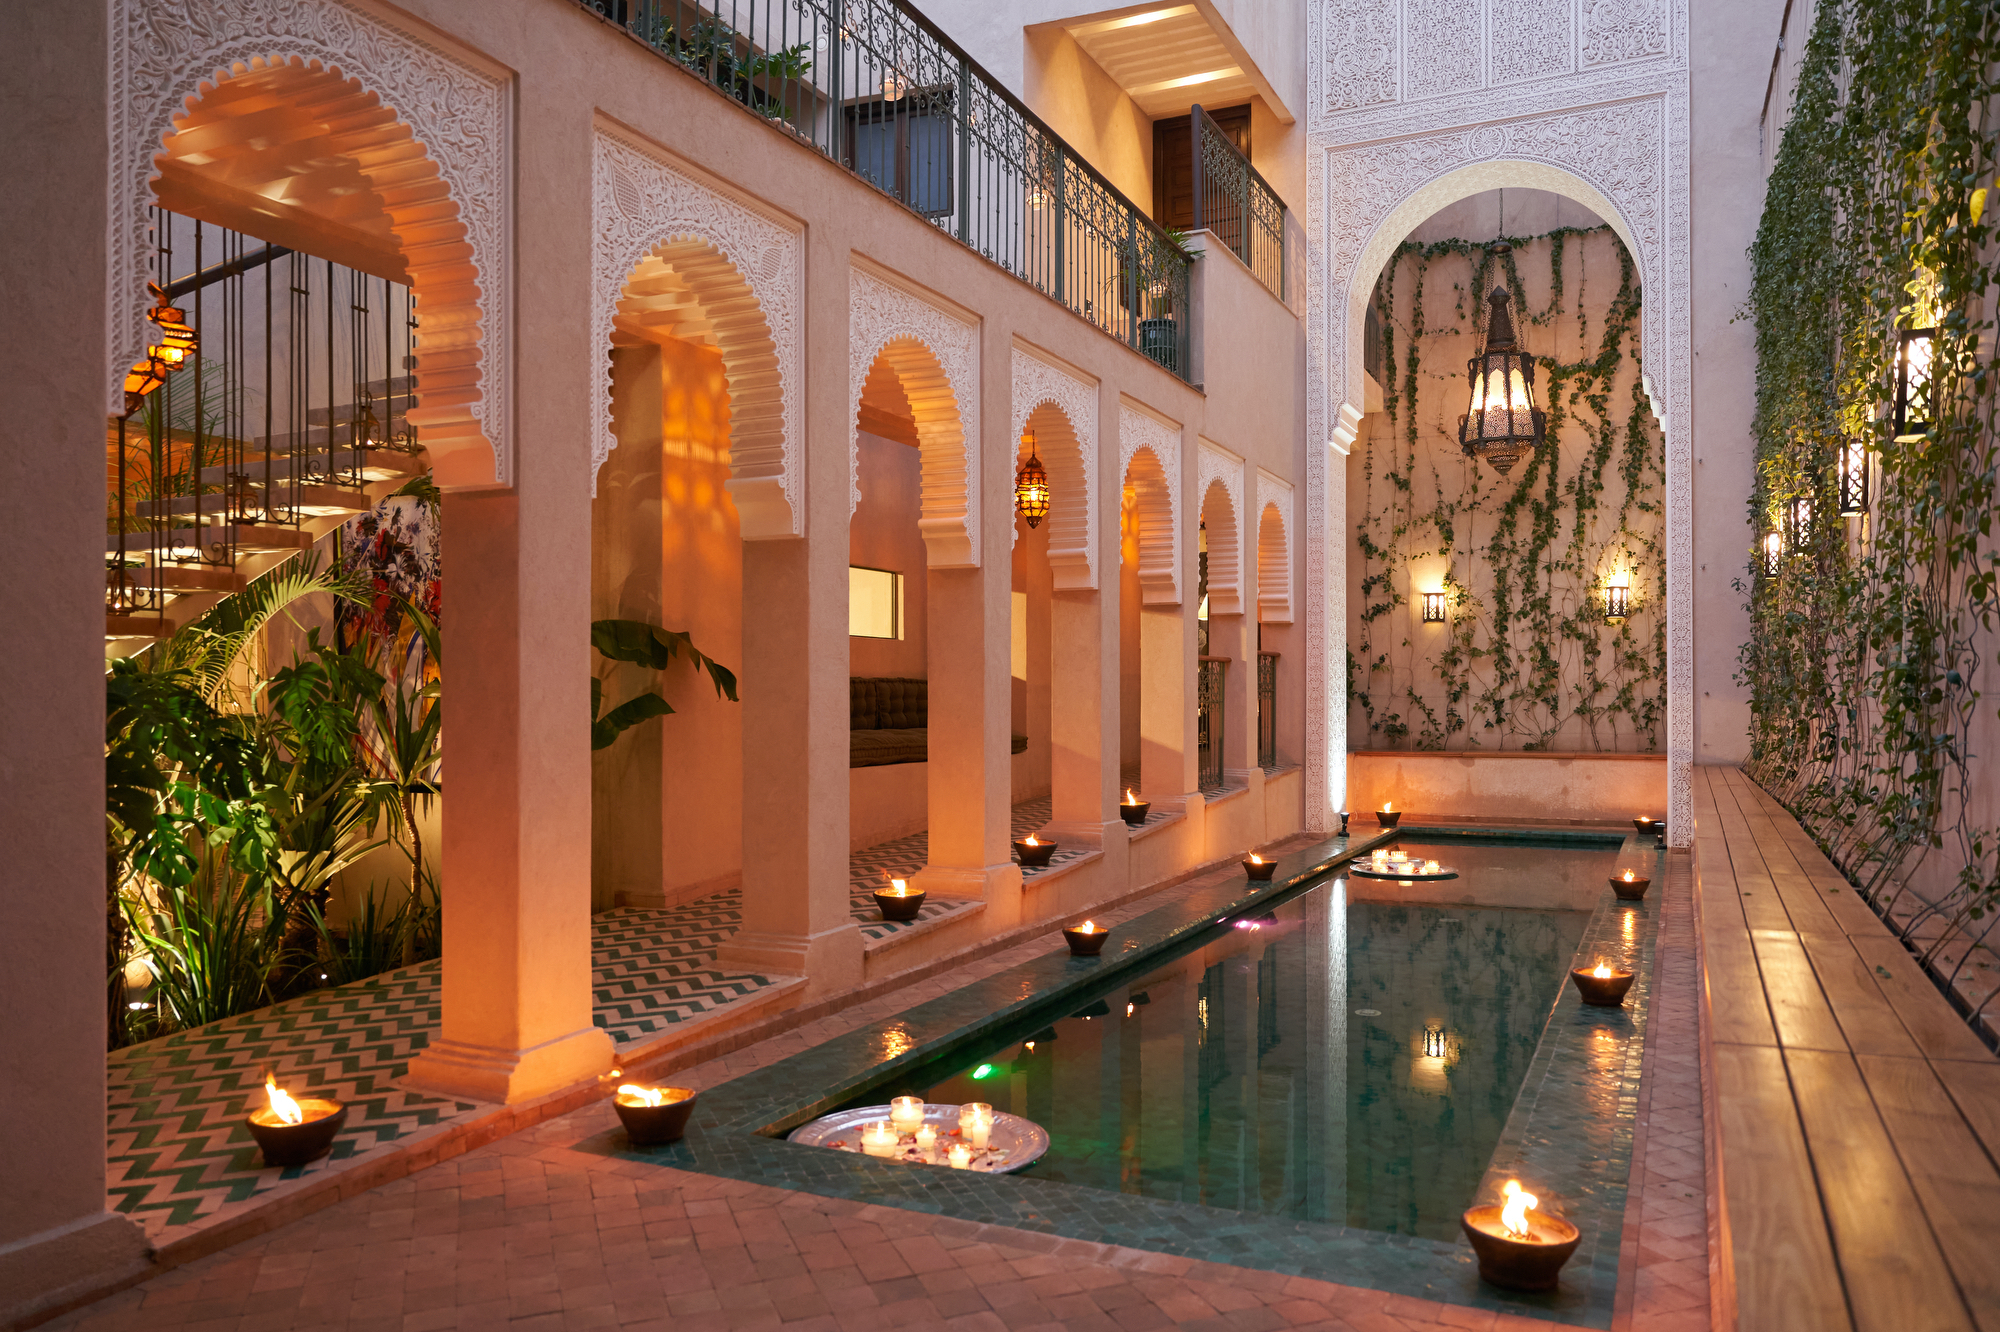 Courtyard pool at night at Izza hotel in Marrakesh - Effect Magazine